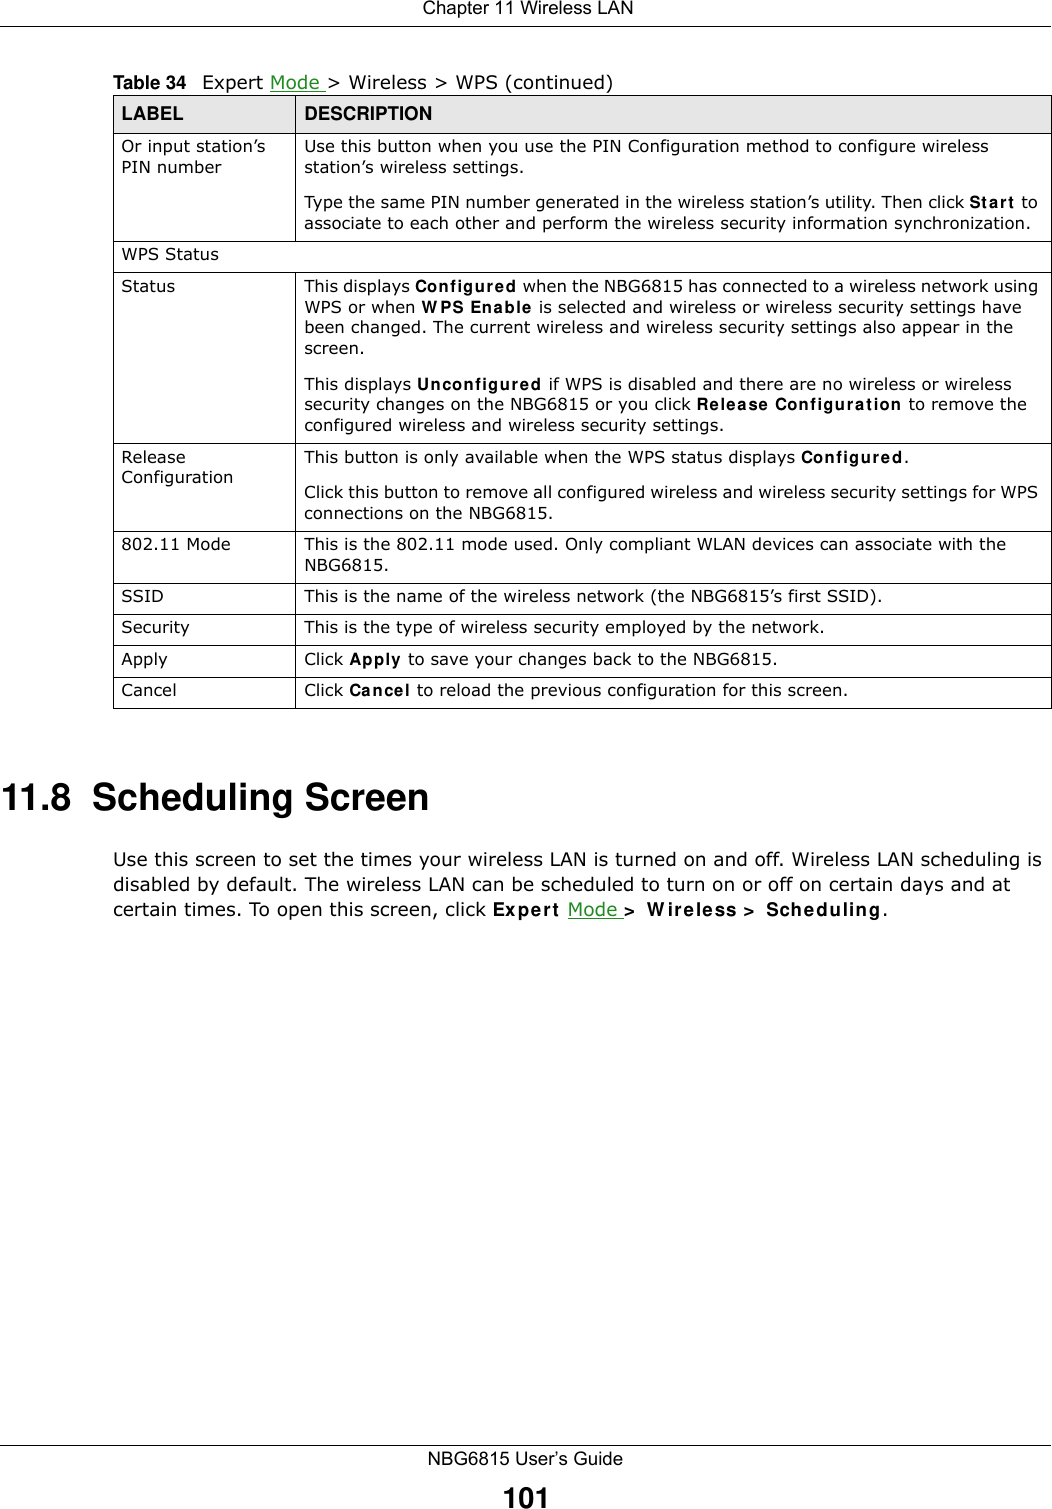  Chapter 11 Wireless LANNBG6815 User’s Guide10111.8  Scheduling ScreenUse this screen to set the times your wireless LAN is turned on and off. Wireless LAN scheduling is disabled by default. The wireless LAN can be scheduled to turn on or off on certain days and at certain times. To open this screen, click Expert Mode &gt; Wireless &gt; Scheduling.Or input station’s PIN numberUse this button when you use the PIN Configuration method to configure wireless station’s wireless settings. Type the same PIN number generated in the wireless station’s utility. Then click Start to associate to each other and perform the wireless security information synchronization. WPS StatusStatus This displays Configured when the NBG6815 has connected to a wireless network using WPS or when WPS Enable is selected and wireless or wireless security settings have been changed. The current wireless and wireless security settings also appear in the screen.This displays Unconfigured if WPS is disabled and there are no wireless or wireless security changes on the NBG6815 or you click Release Configuration to remove the configured wireless and wireless security settings.Release ConfigurationThis button is only available when the WPS status displays Configured.Click this button to remove all configured wireless and wireless security settings for WPS connections on the NBG6815.802.11 Mode This is the 802.11 mode used. Only compliant WLAN devices can associate with the NBG6815.SSID This is the name of the wireless network (the NBG6815’s first SSID).Security This is the type of wireless security employed by the network.Apply Click Apply to save your changes back to the NBG6815.Cancel Click Cancel to reload the previous configuration for this screen.Table 34   Expert Mode &gt; Wireless &gt; WPS (continued)LABEL DESCRIPTION